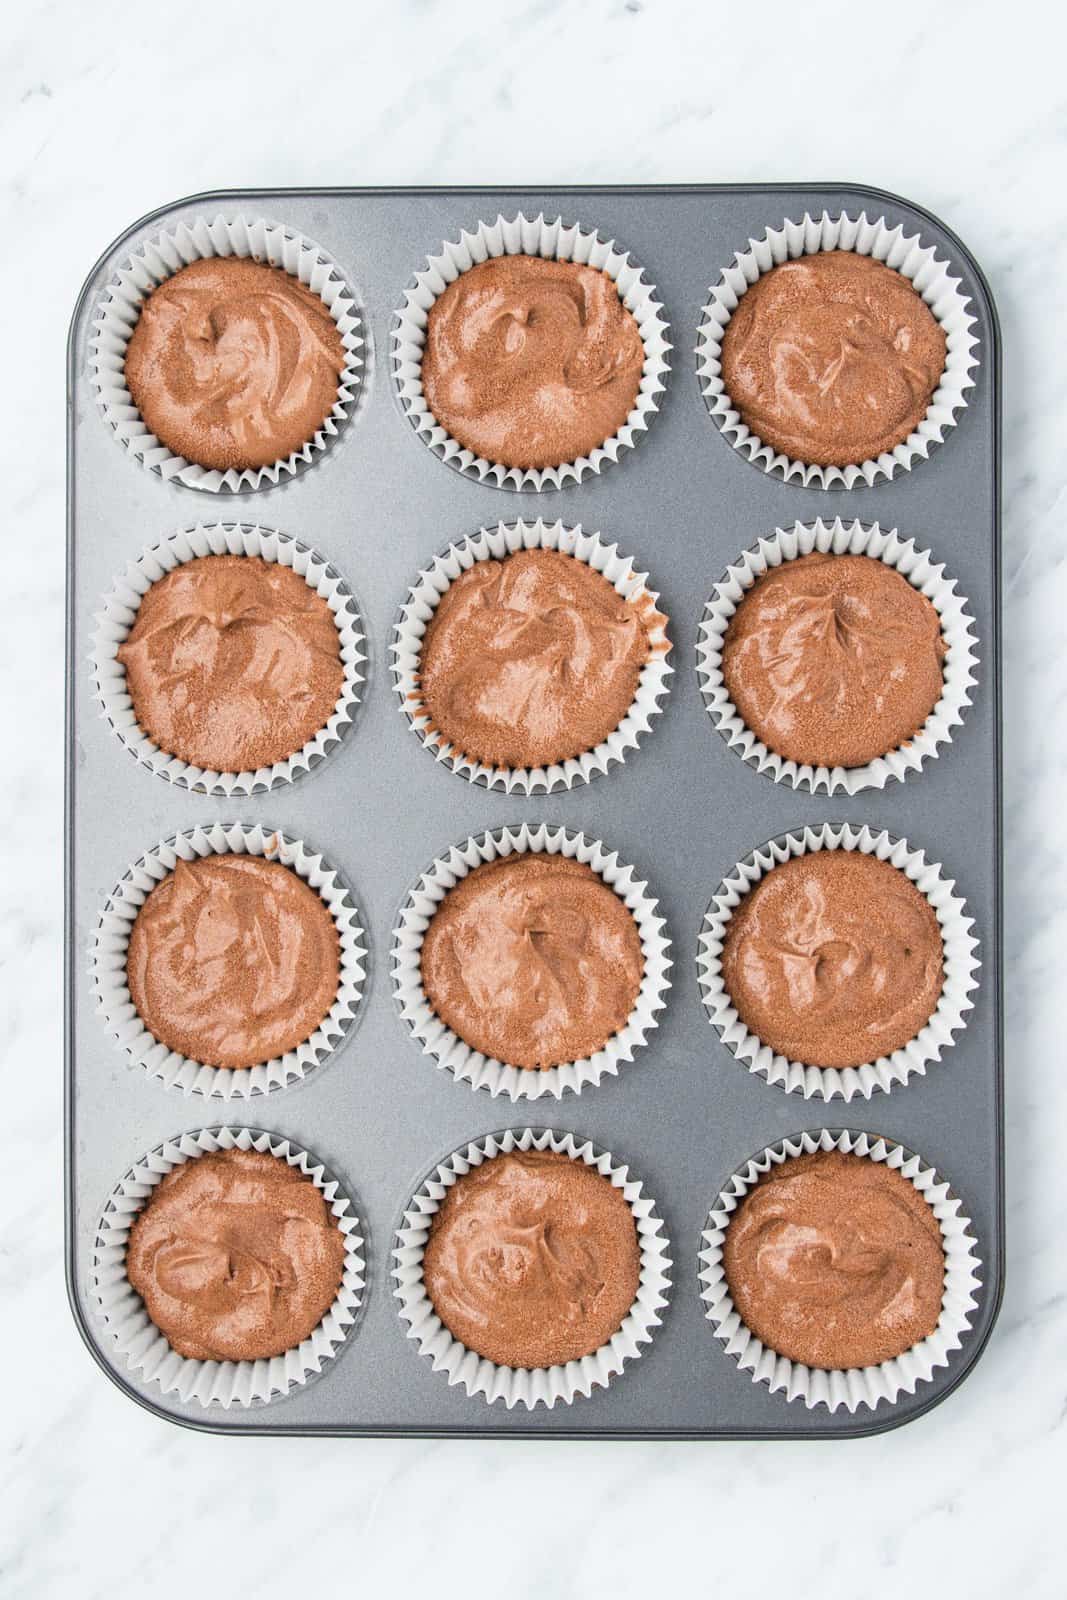 Batter portioned into cupcake pan.